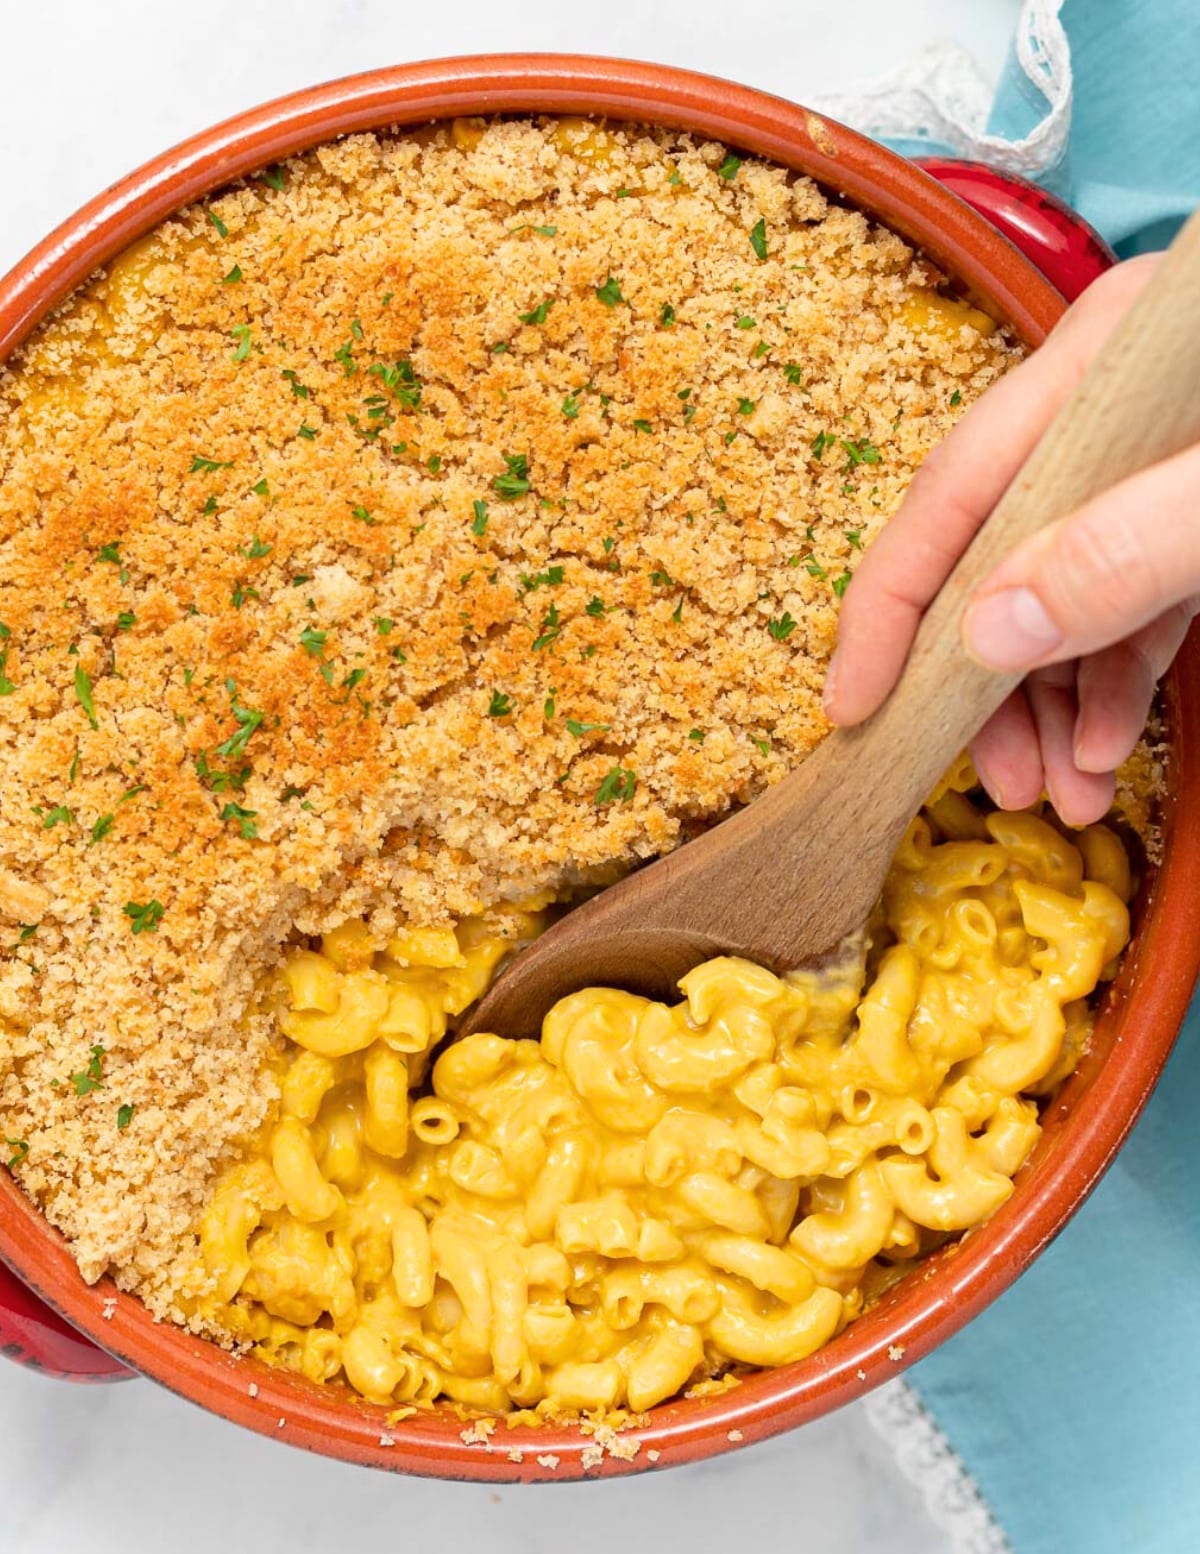 a spoon scooping out some baked macaroni and cheese from a terracotta baking dish